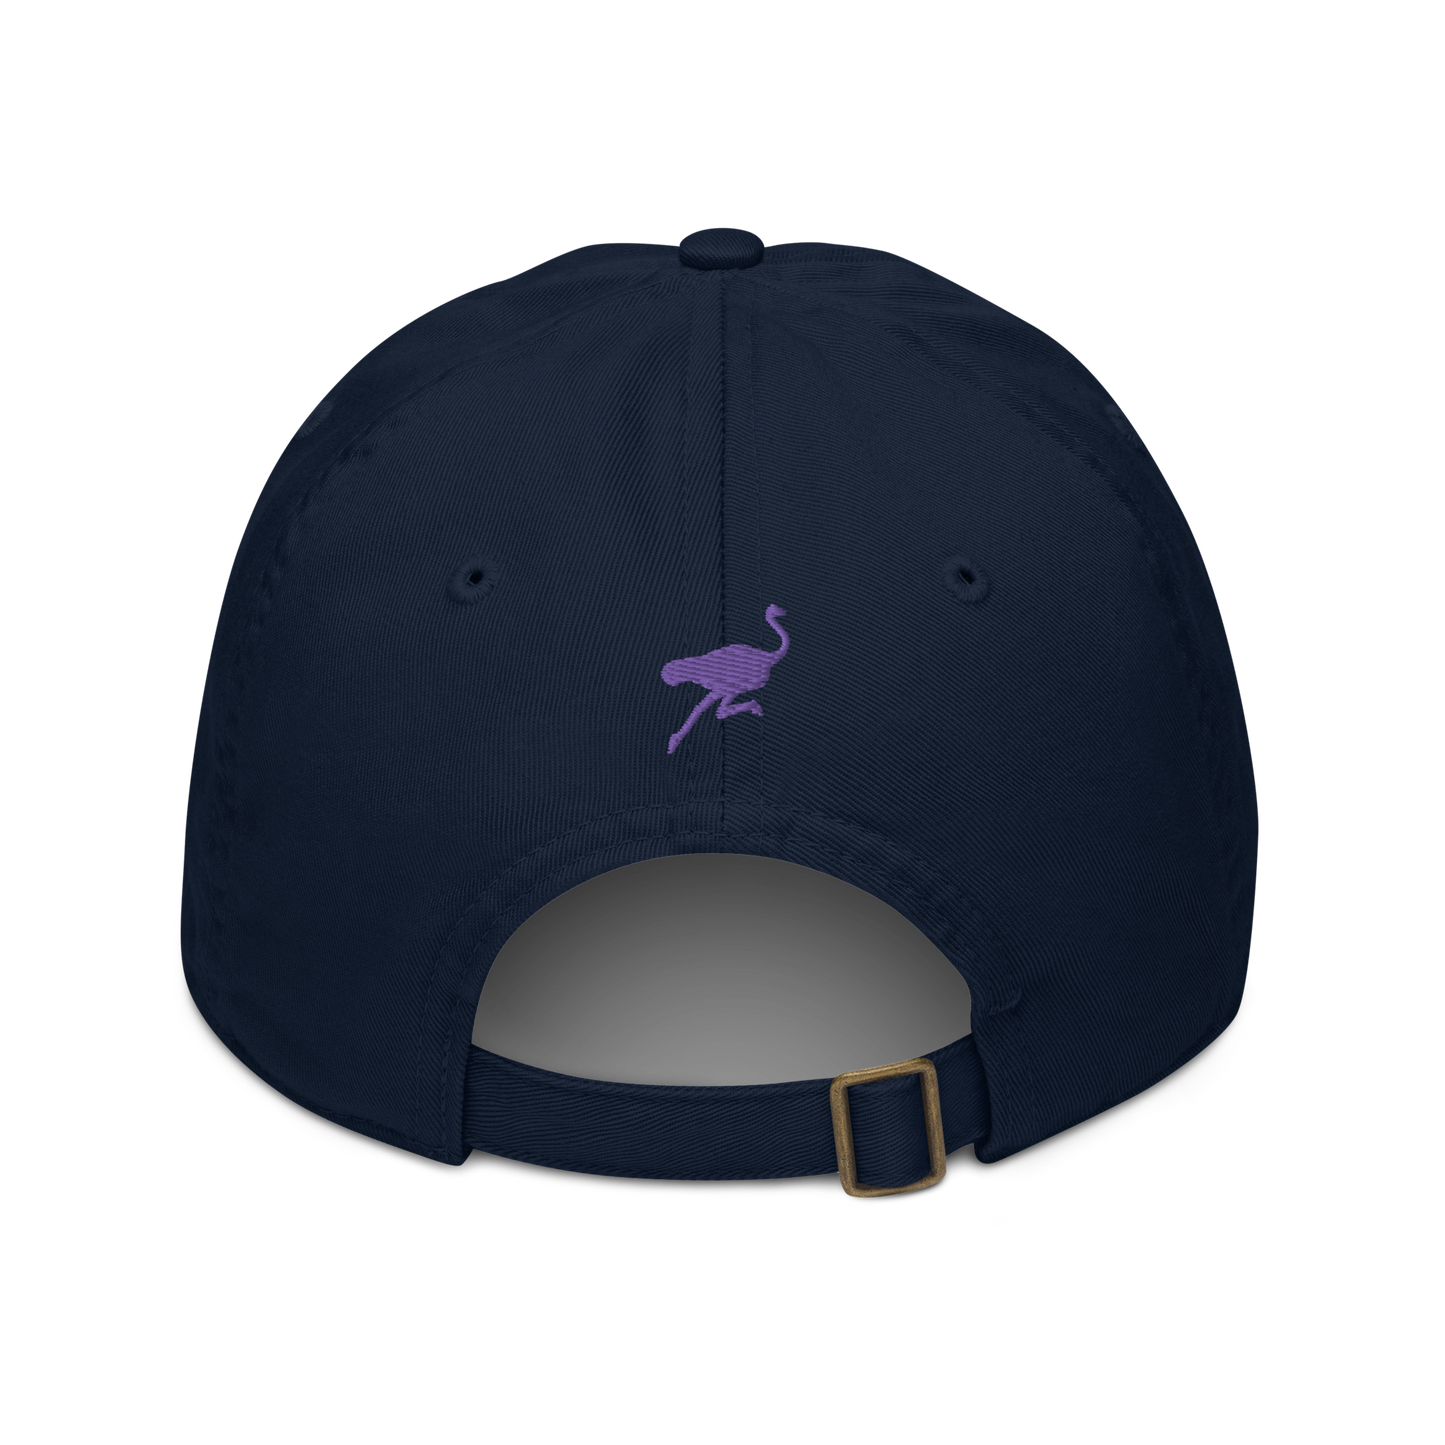 Back view of a pacific blue nostr dad hat.